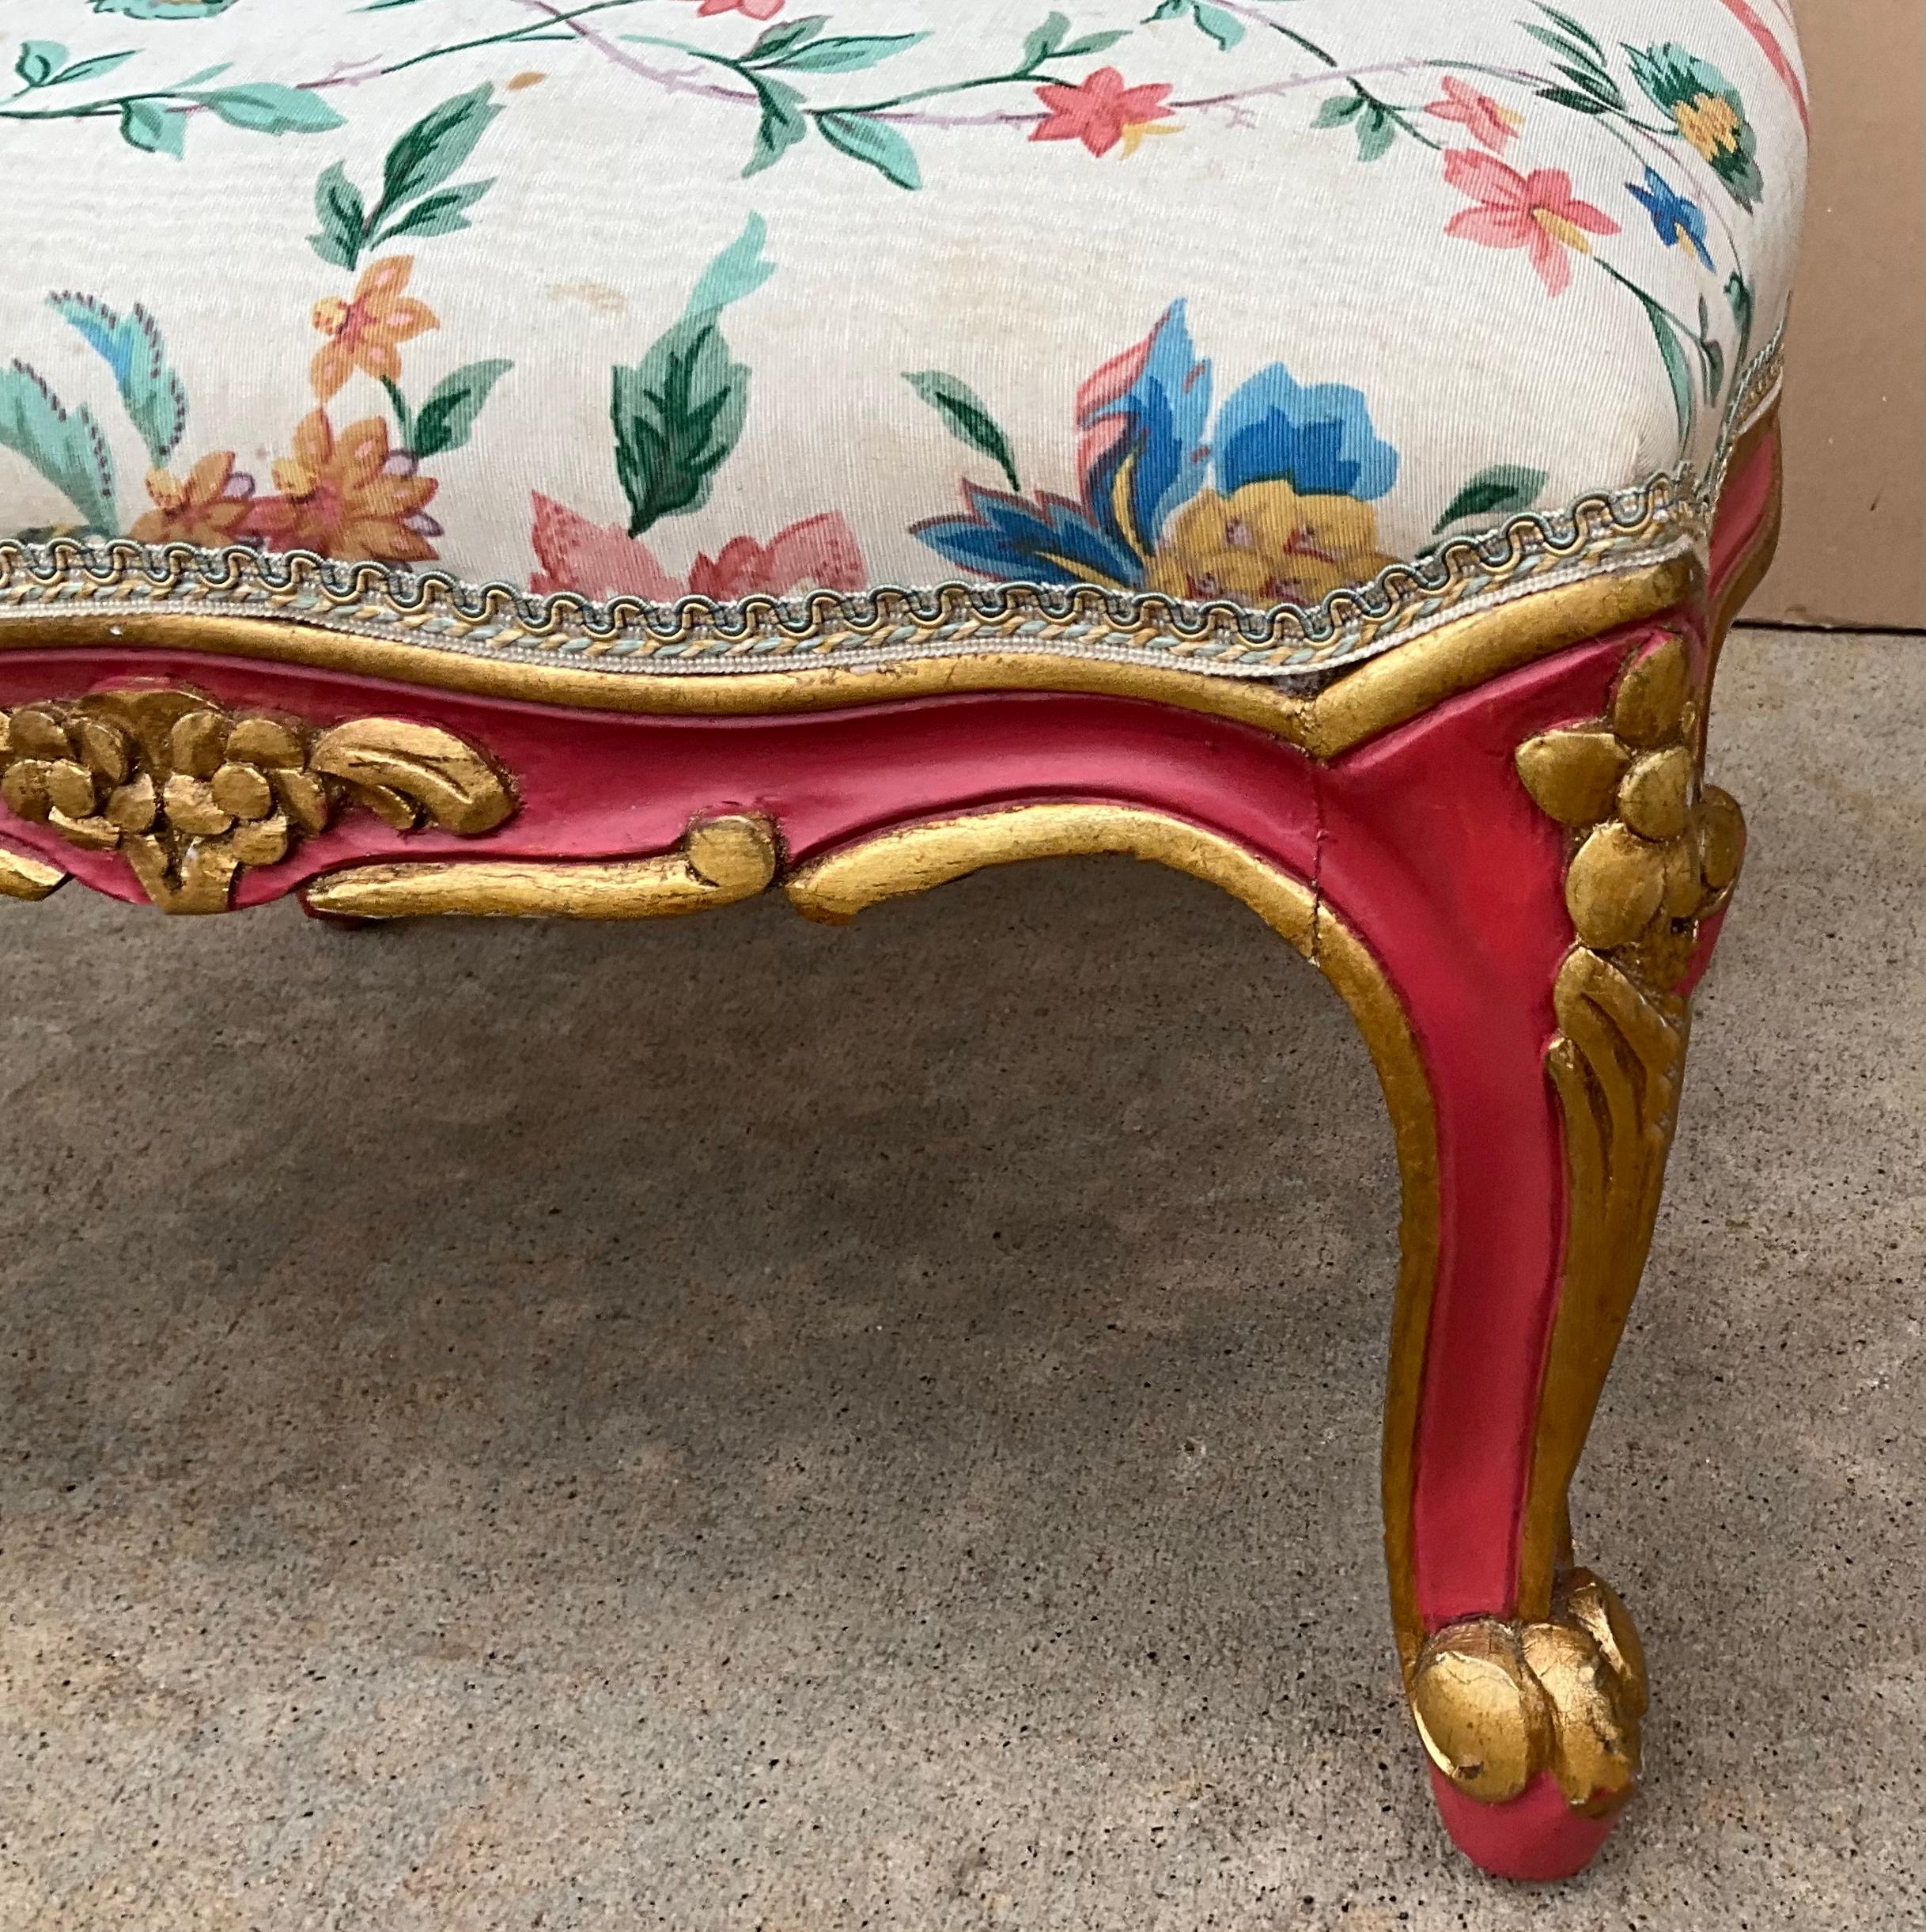 Upholstery Mid-Century French Louis XVI Style Pink And Gilt Venetian Ottomans / Stools - 2 For Sale